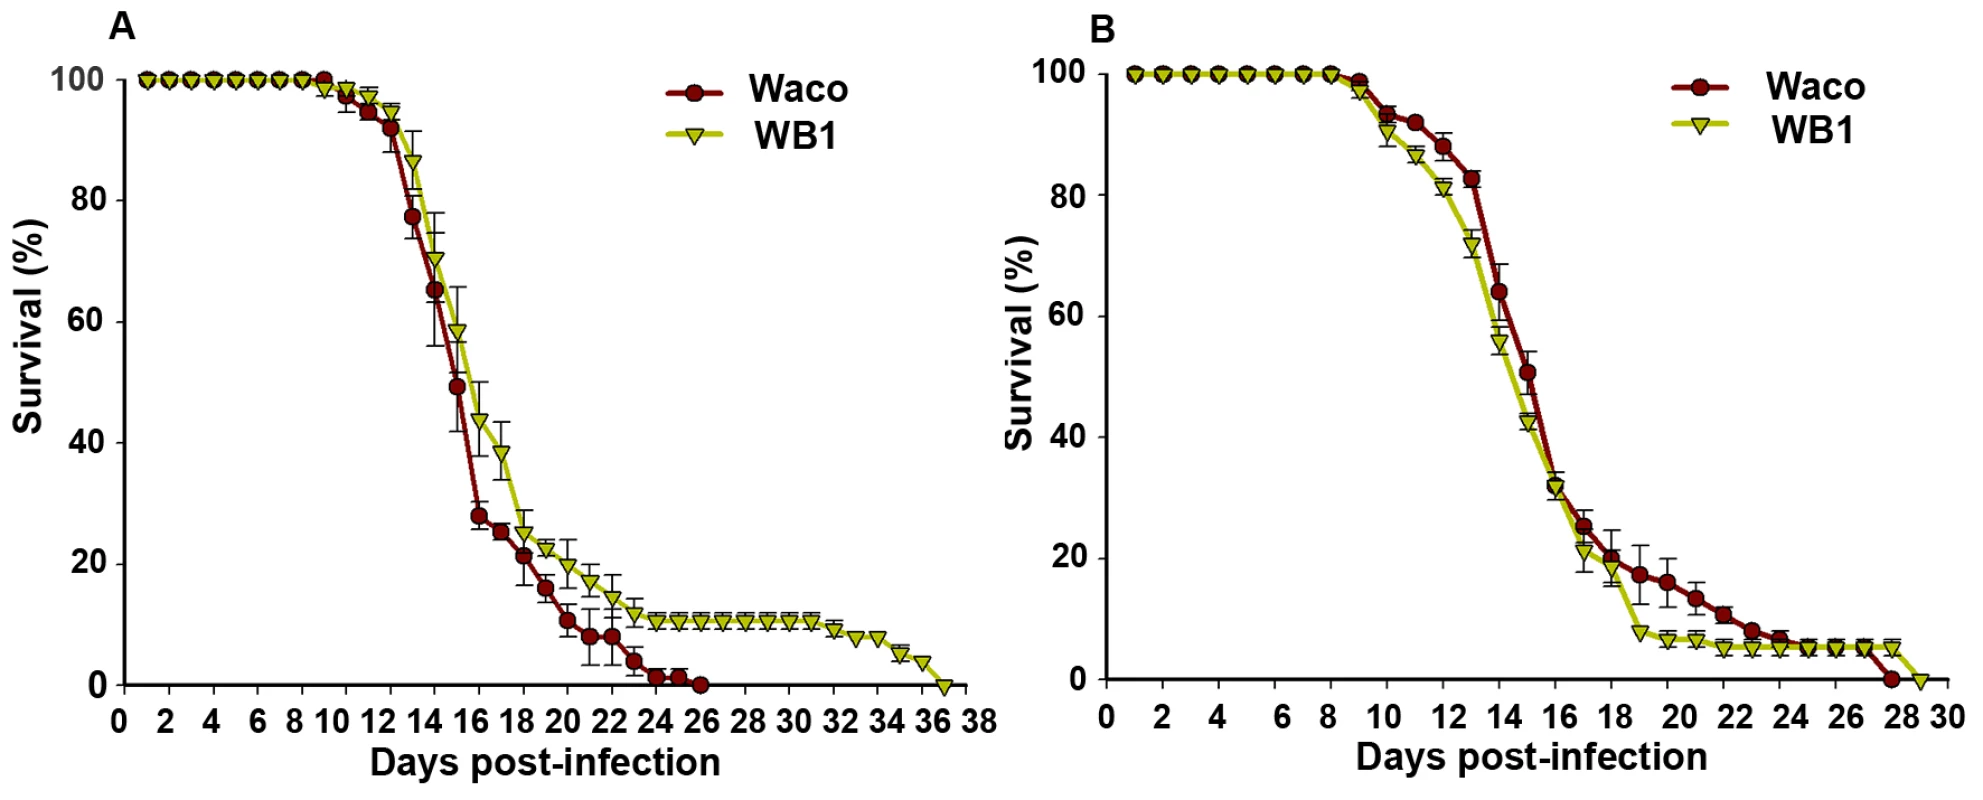 Longevity of Waco and WB1 mosquitoes fed with blood mixed with or without DENV.